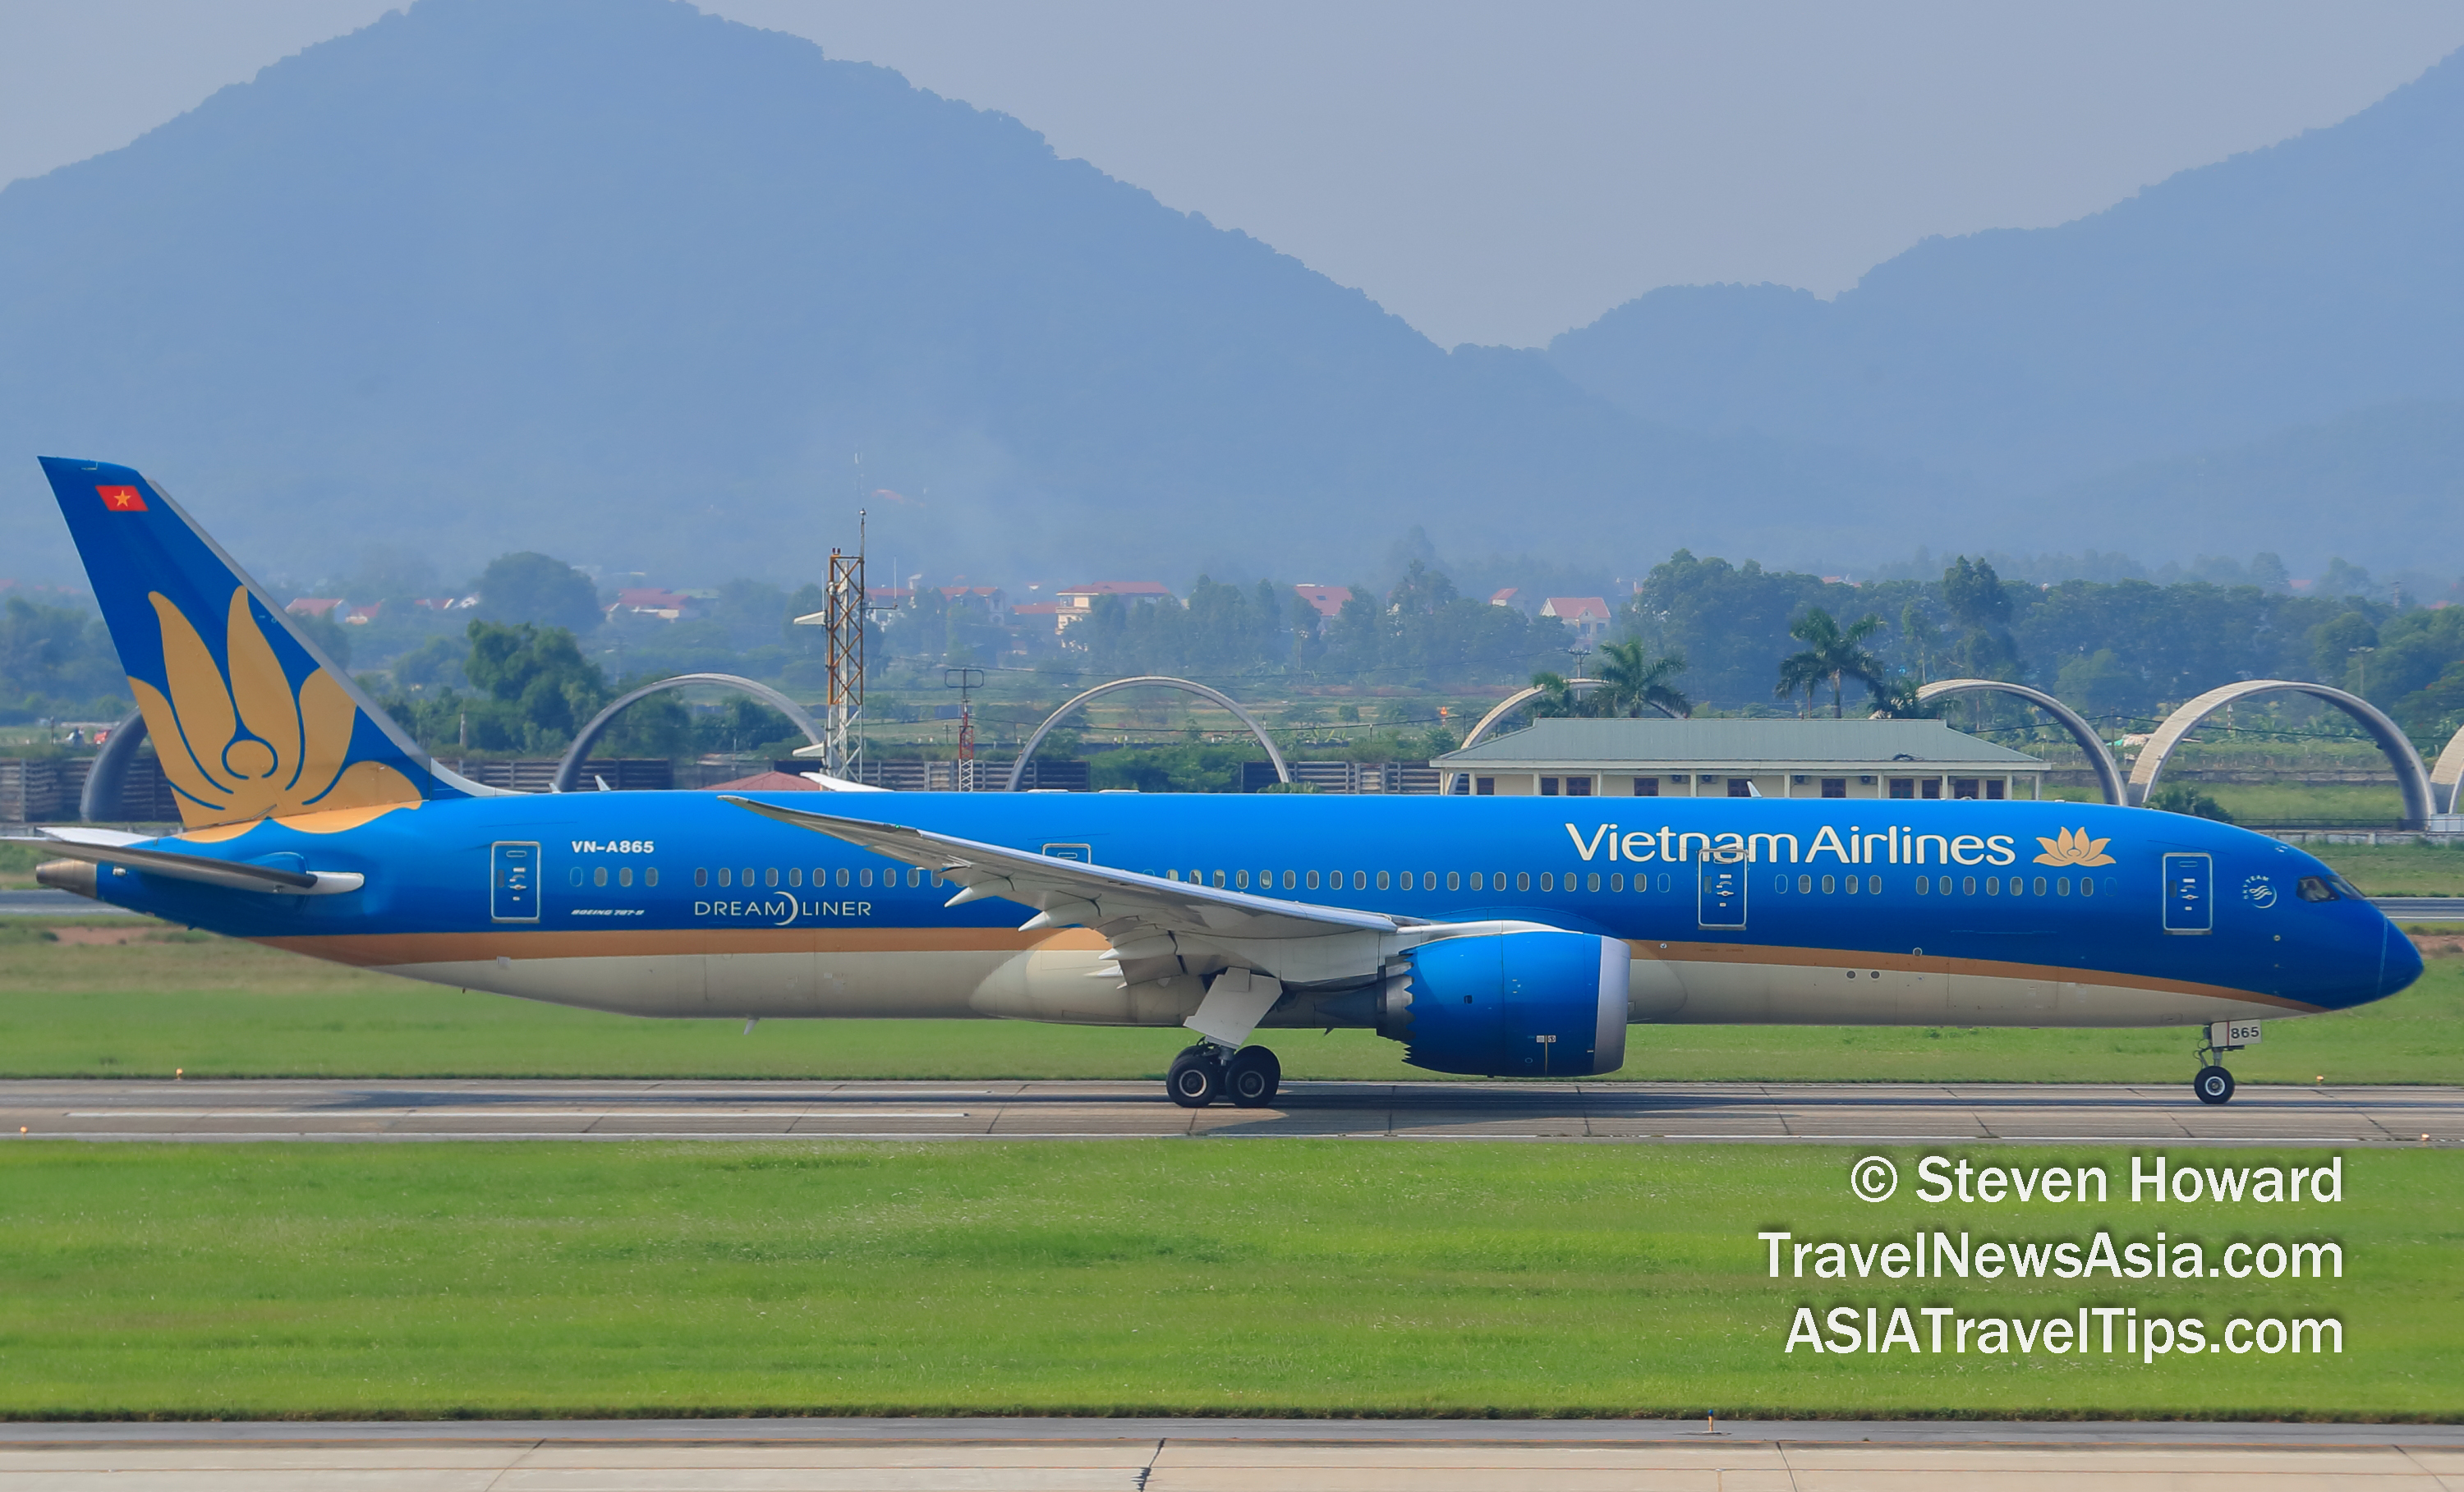 Vietnam Airlines Boeing 787-8 reg: VN865. Picture by Steven Howard of TravelNewsAsia.com Click to enlarge.